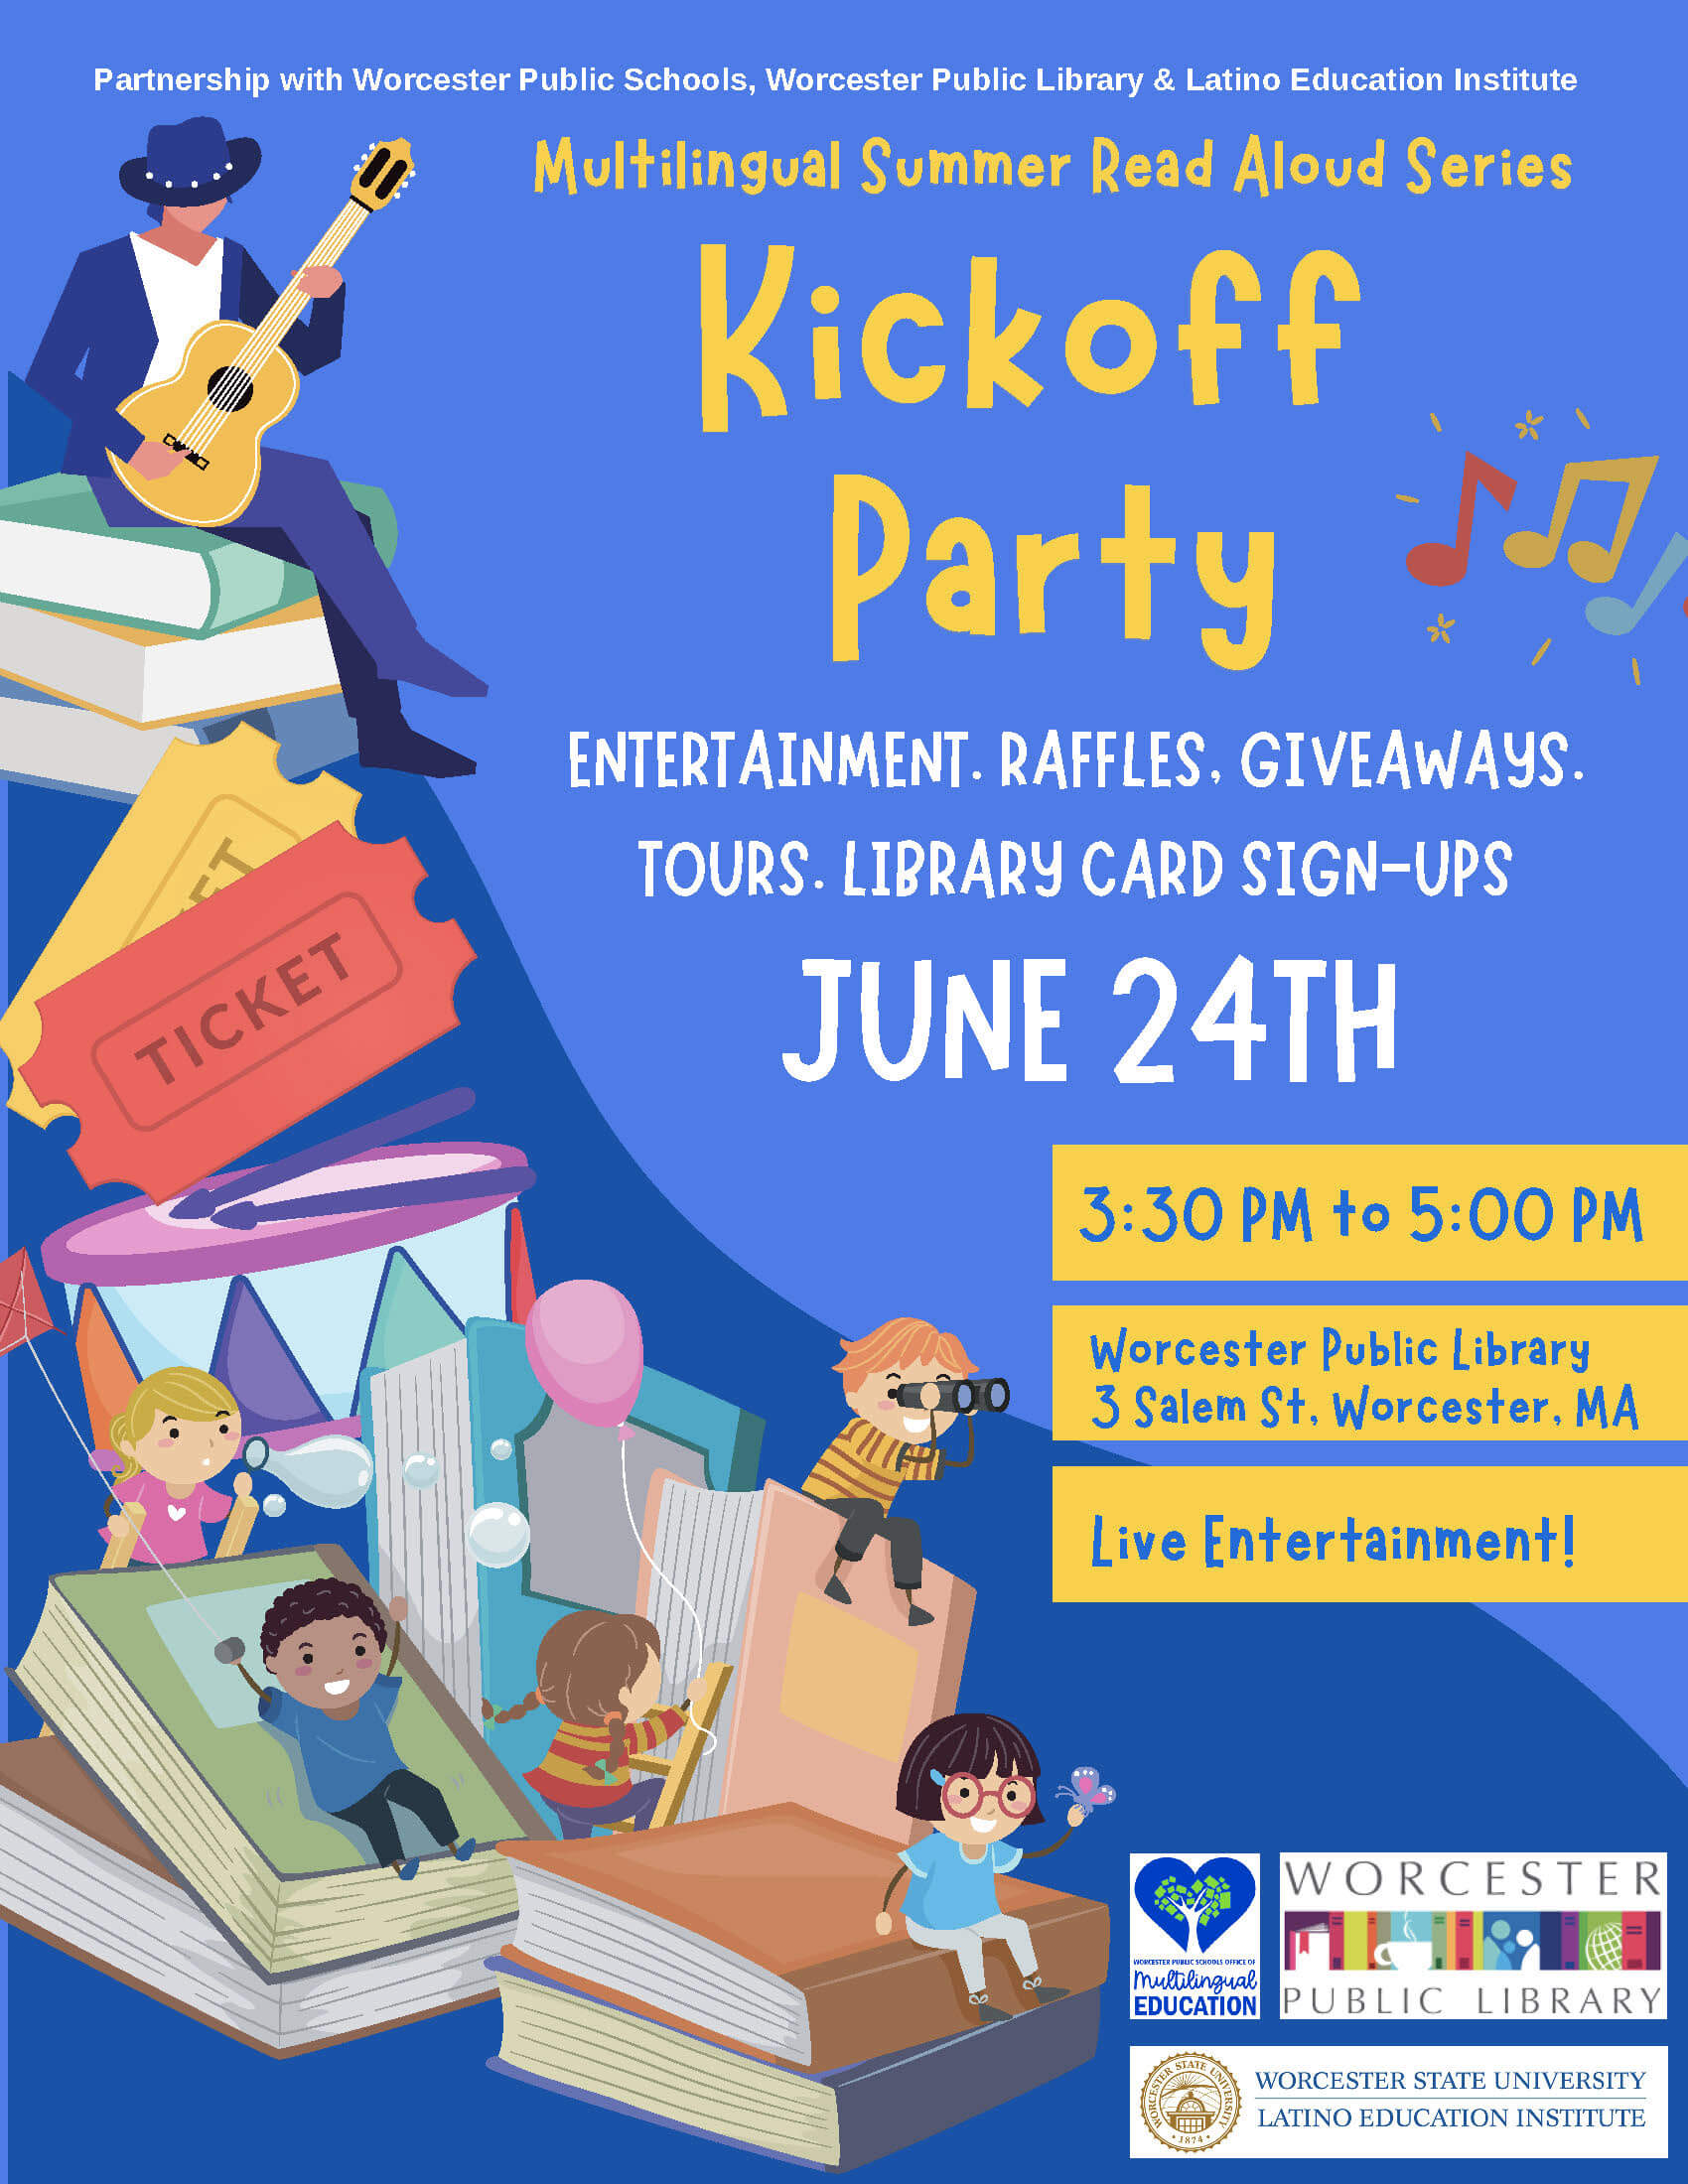 Kickoff Party flyer